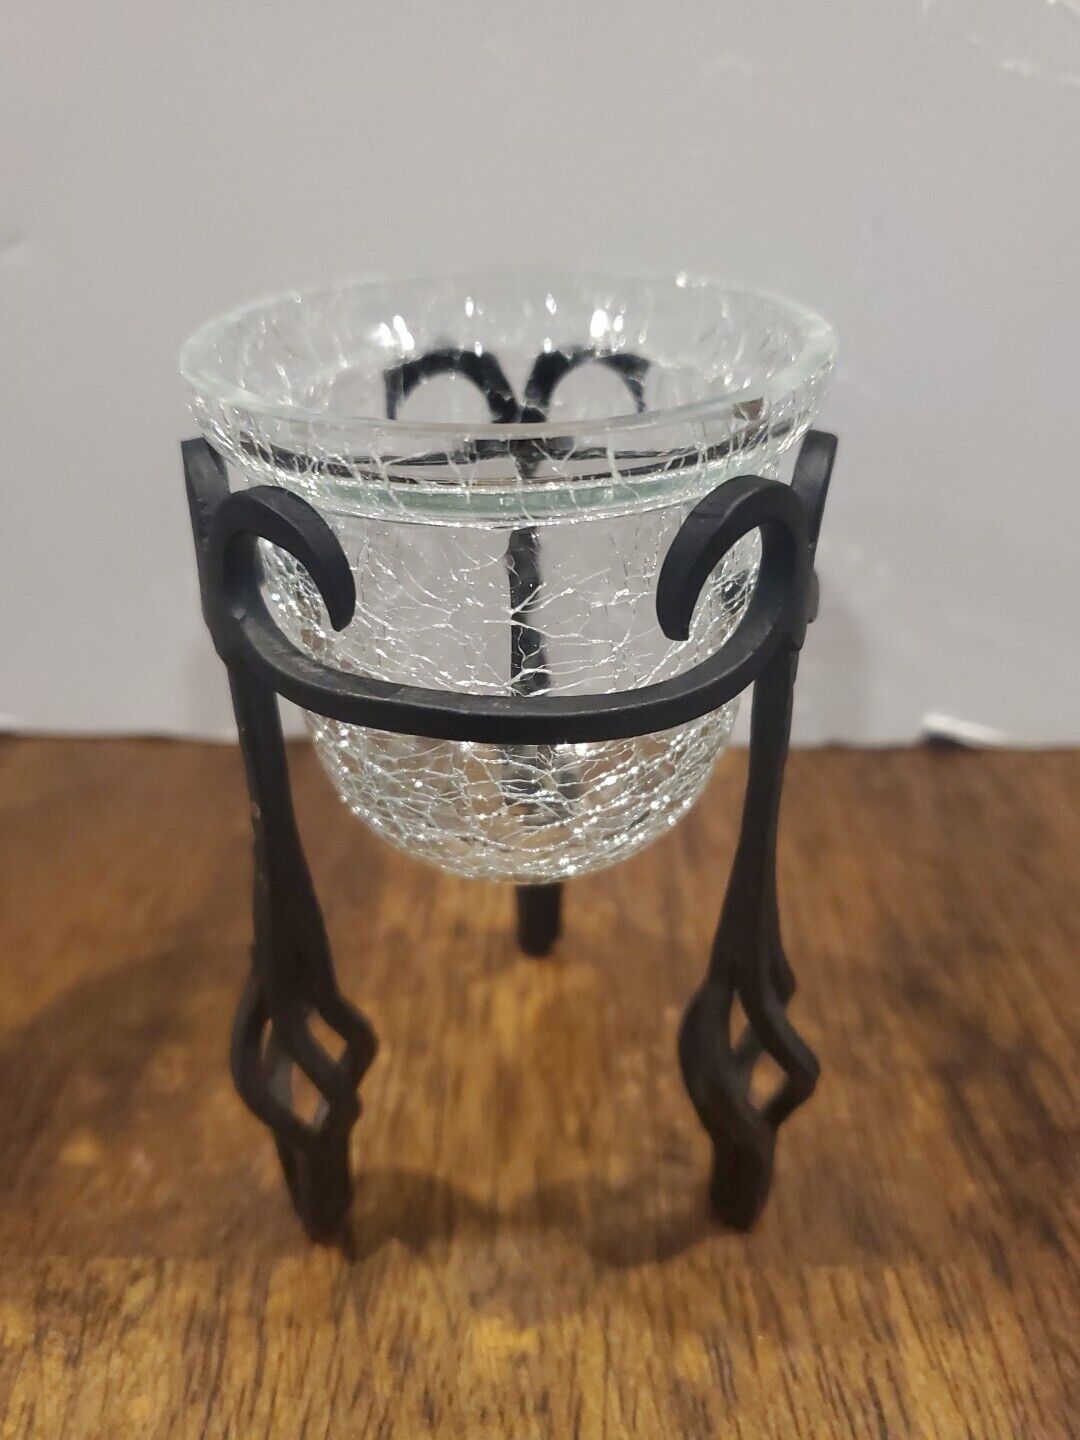 Vintage Wrought Iron Candle Holder Crackled Glass Cup Fantasy Castle Style 4.5\